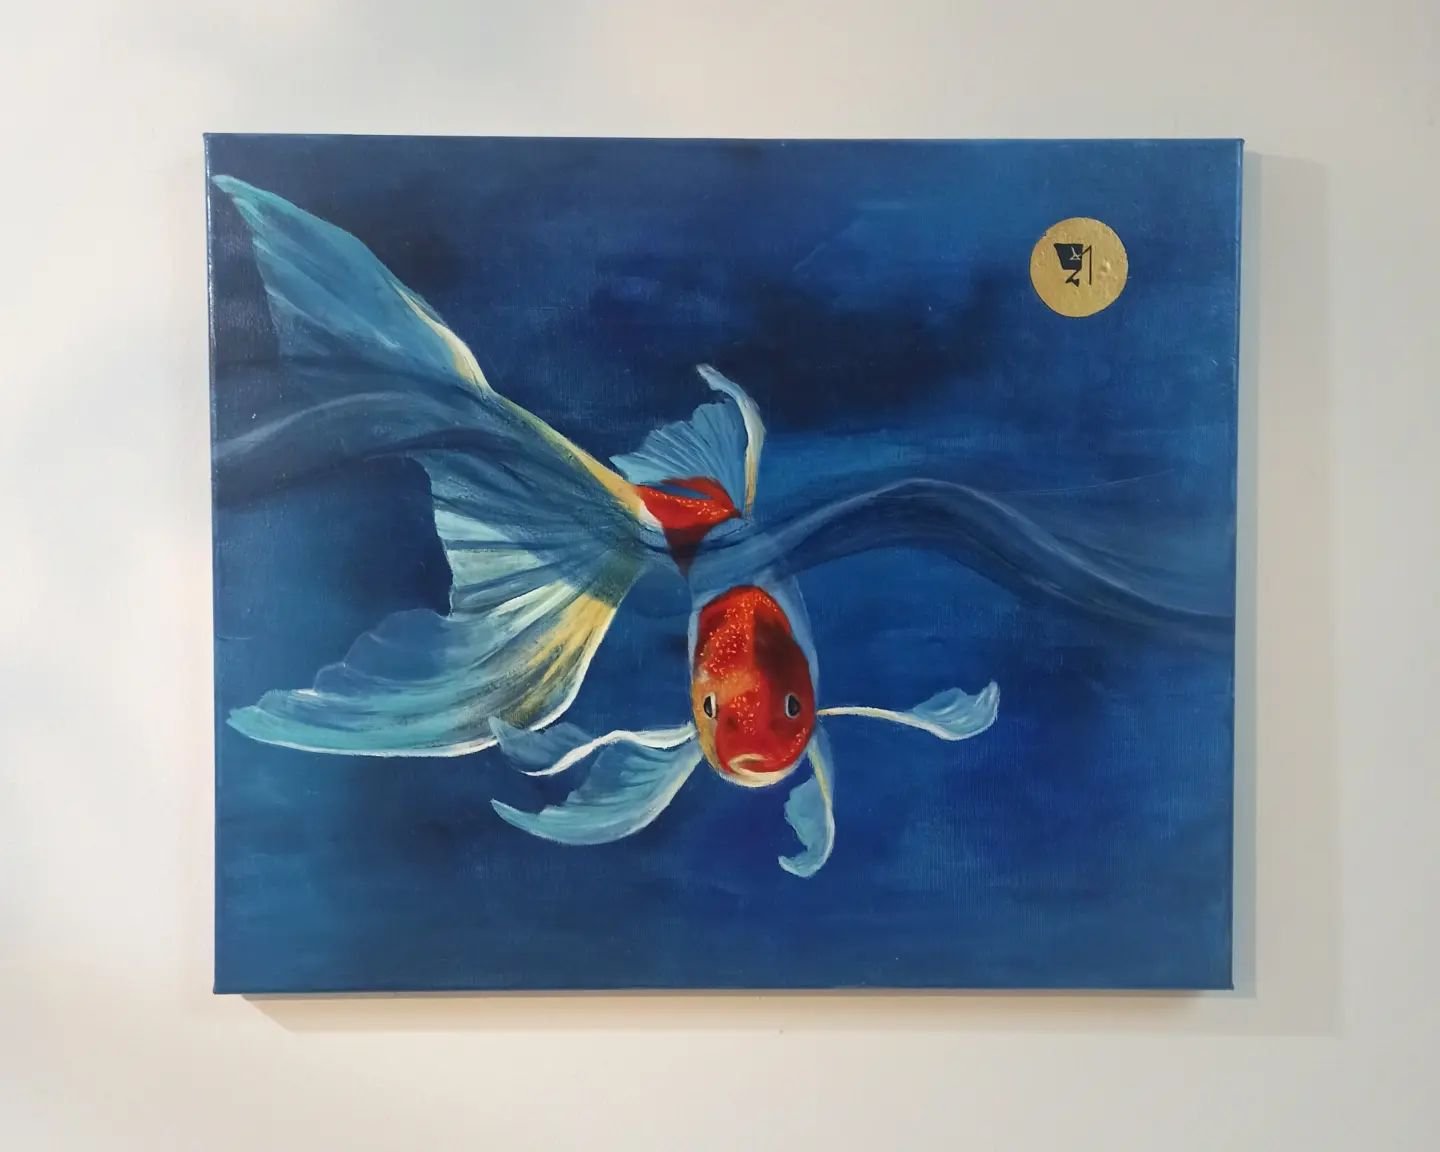 I USED TO BE A KOI
2024, Oil on canvas &amp; 24k gold leaves, 50 x 60 cm. 

I used to be many different things, I believe. Don't you? It's just impossible to not acknowledge how connected we all are. We all flow in the same ocean. 

#goldleaves #magi